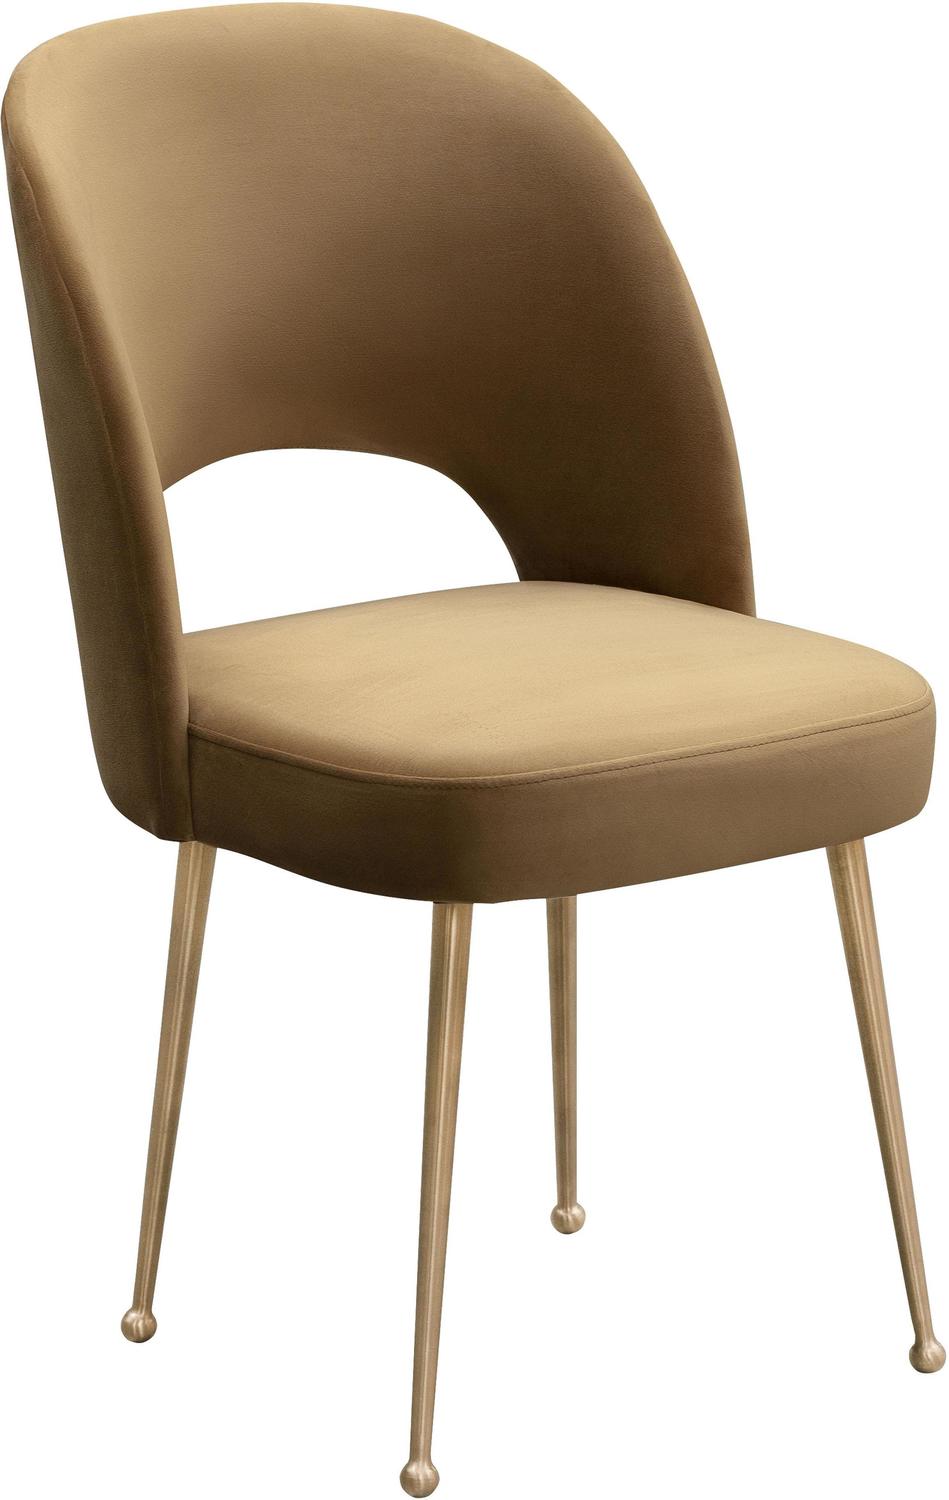 gold accent chair with ottoman Tov Furniture Dining Chairs Cognac